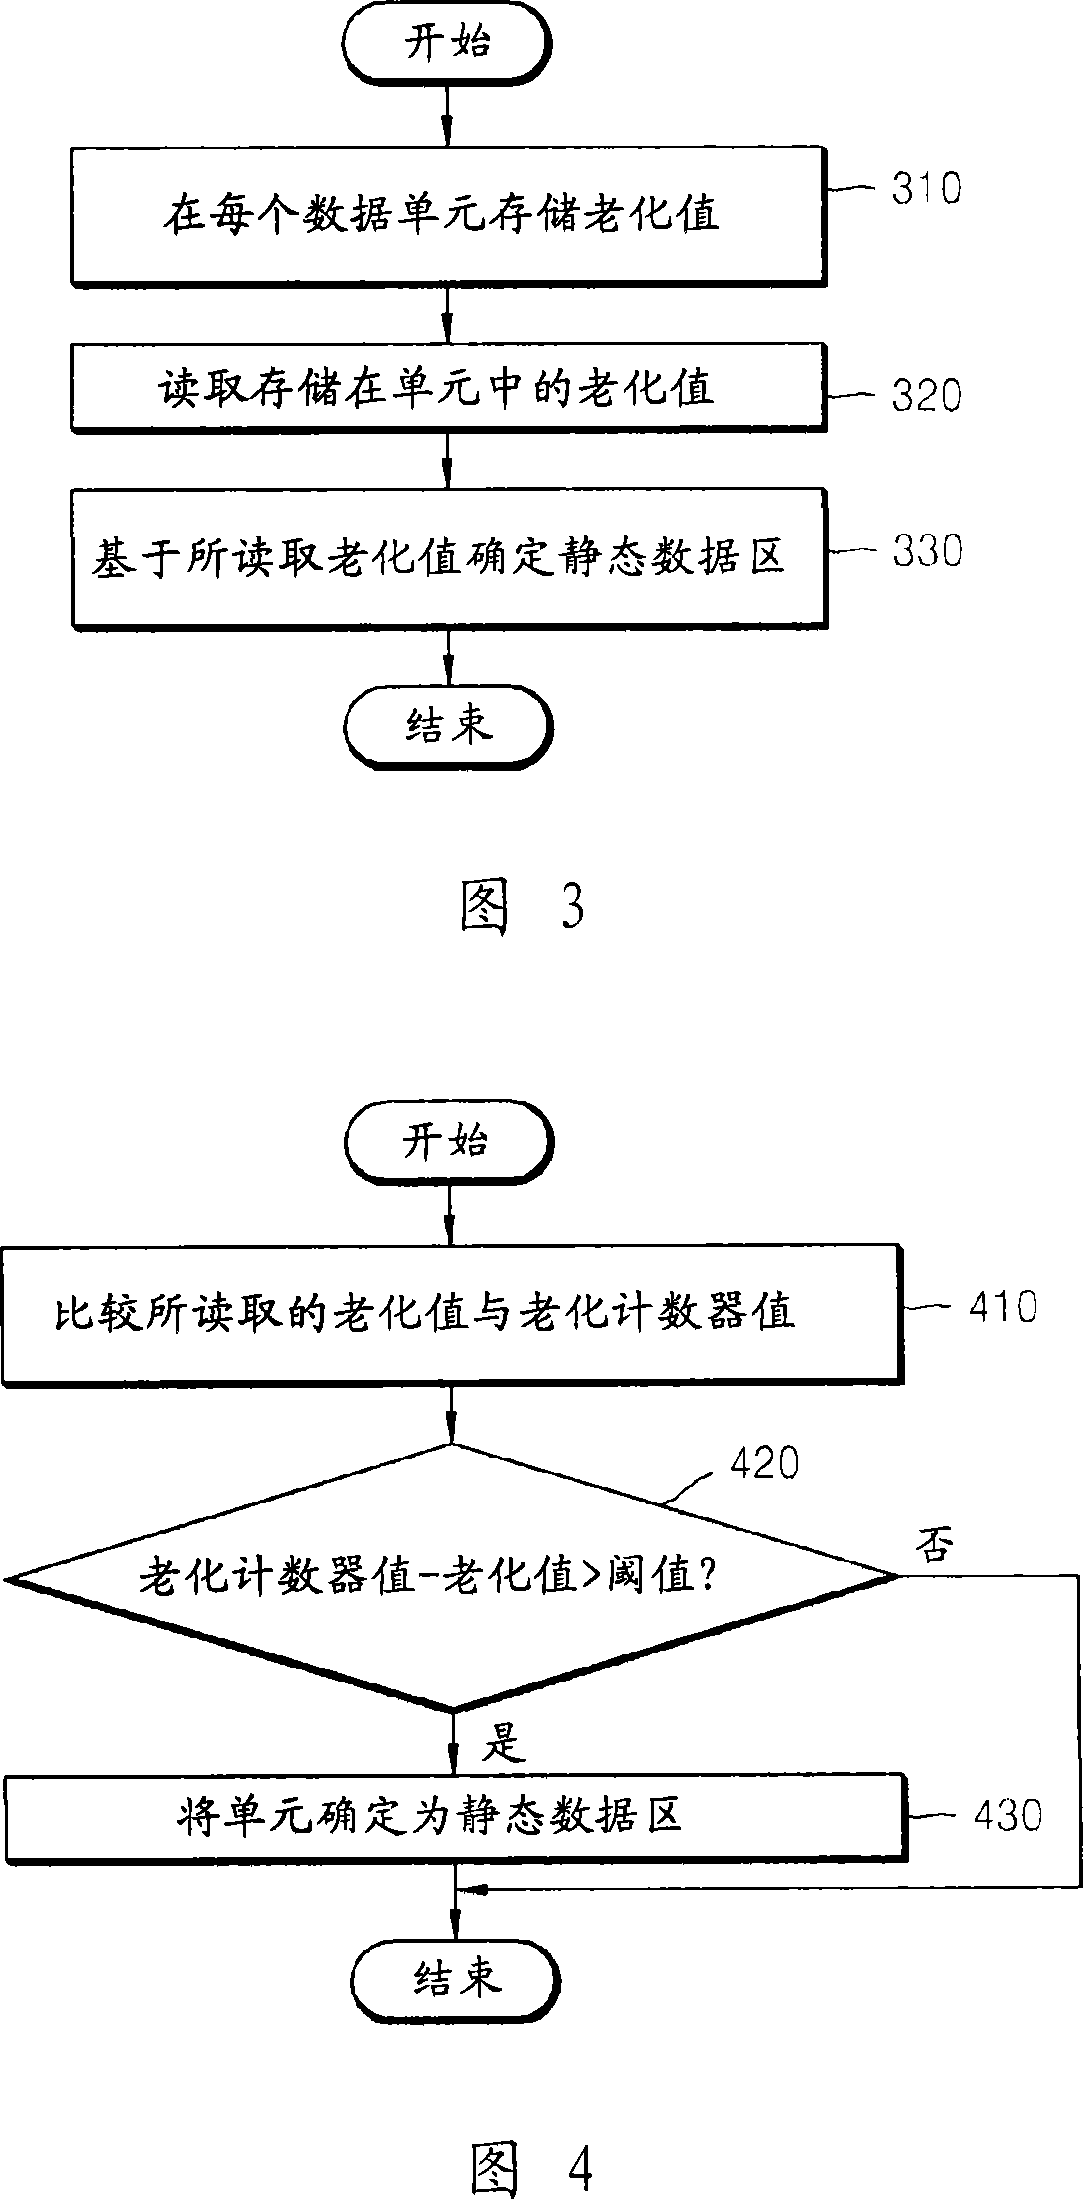 Method and apparatus for detecting static data area, wear-leveling, and merging data units